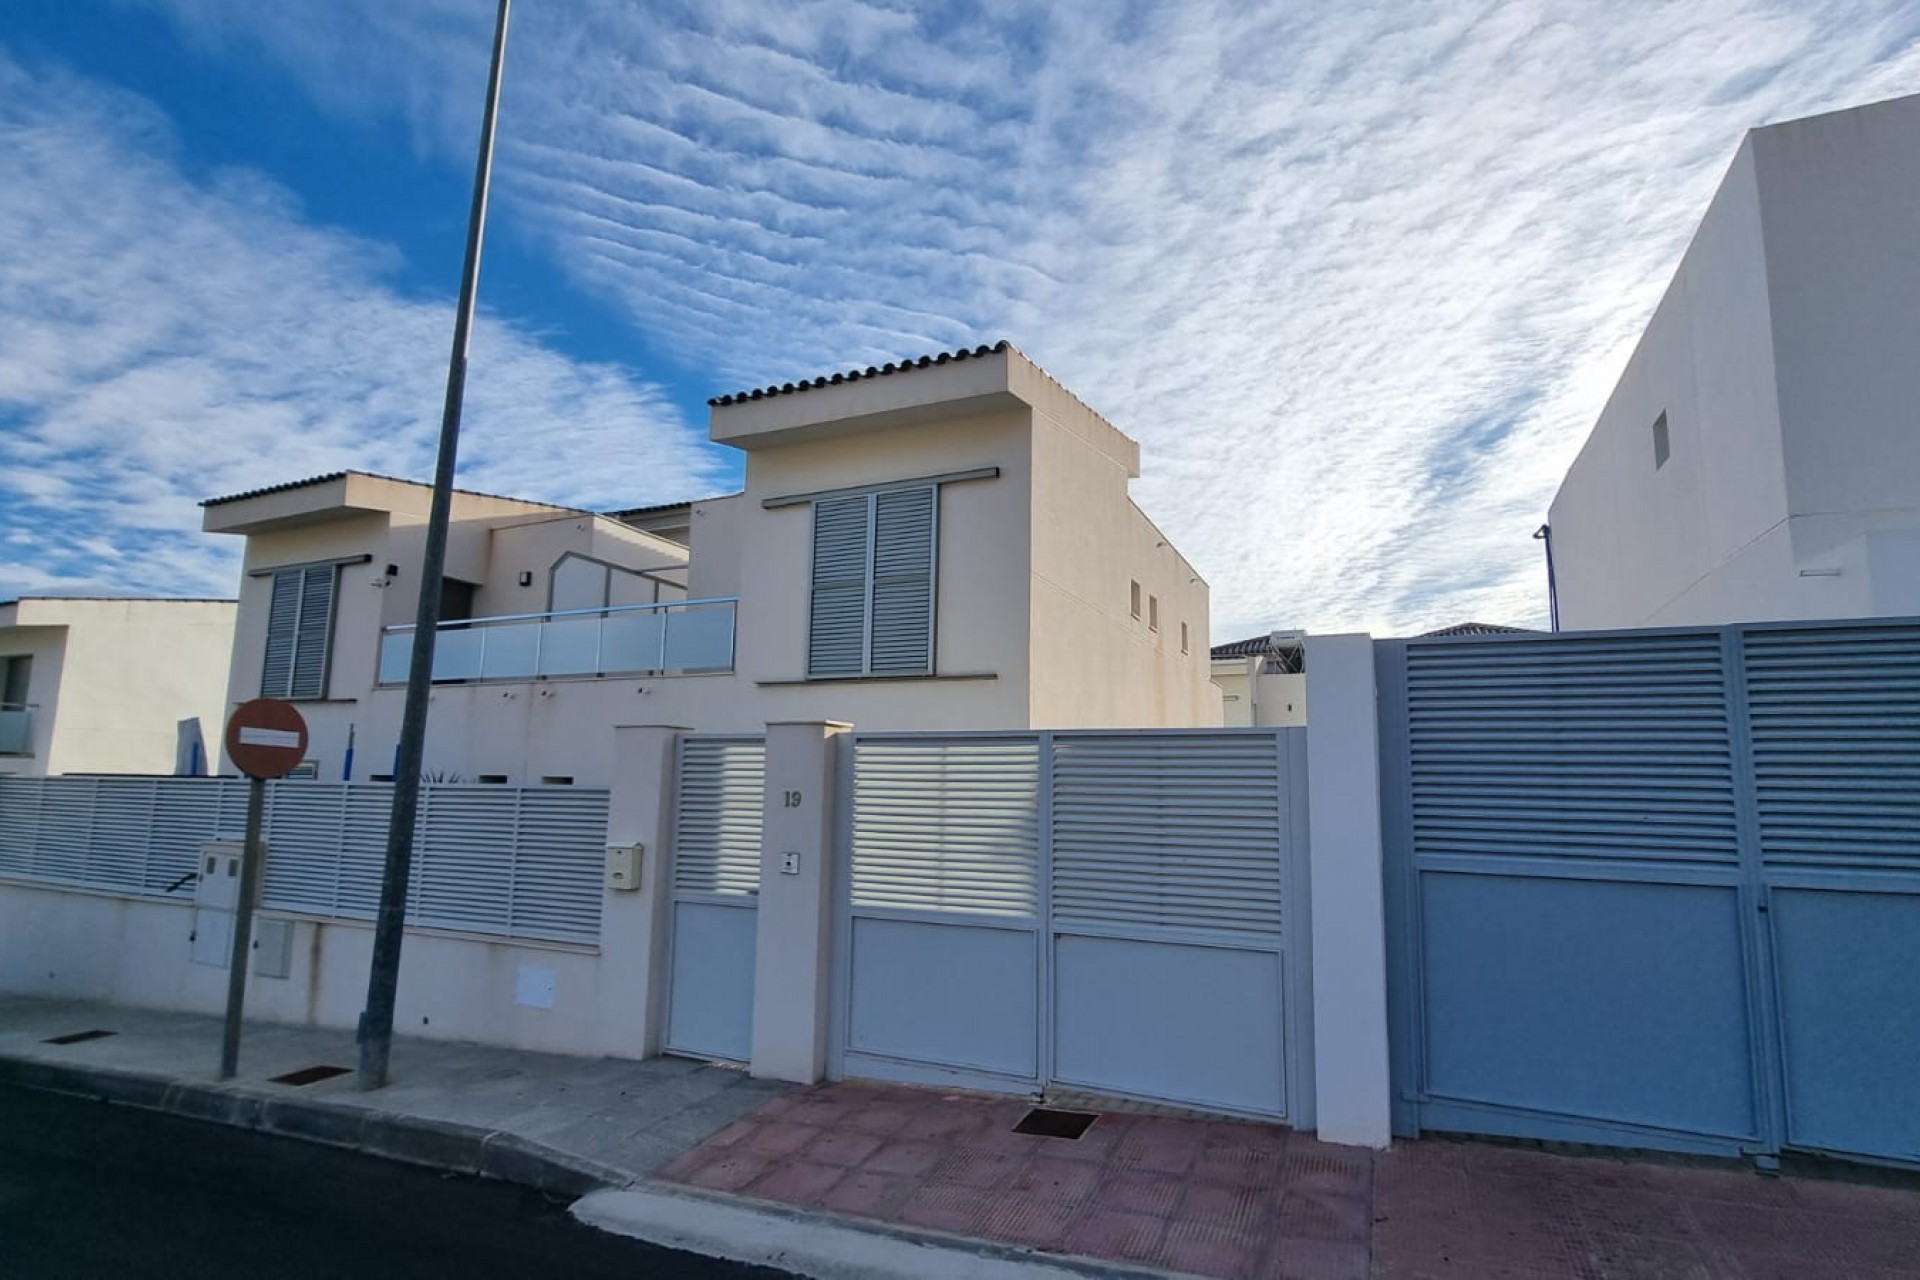 Reventa - Town House -
Cox - Inland